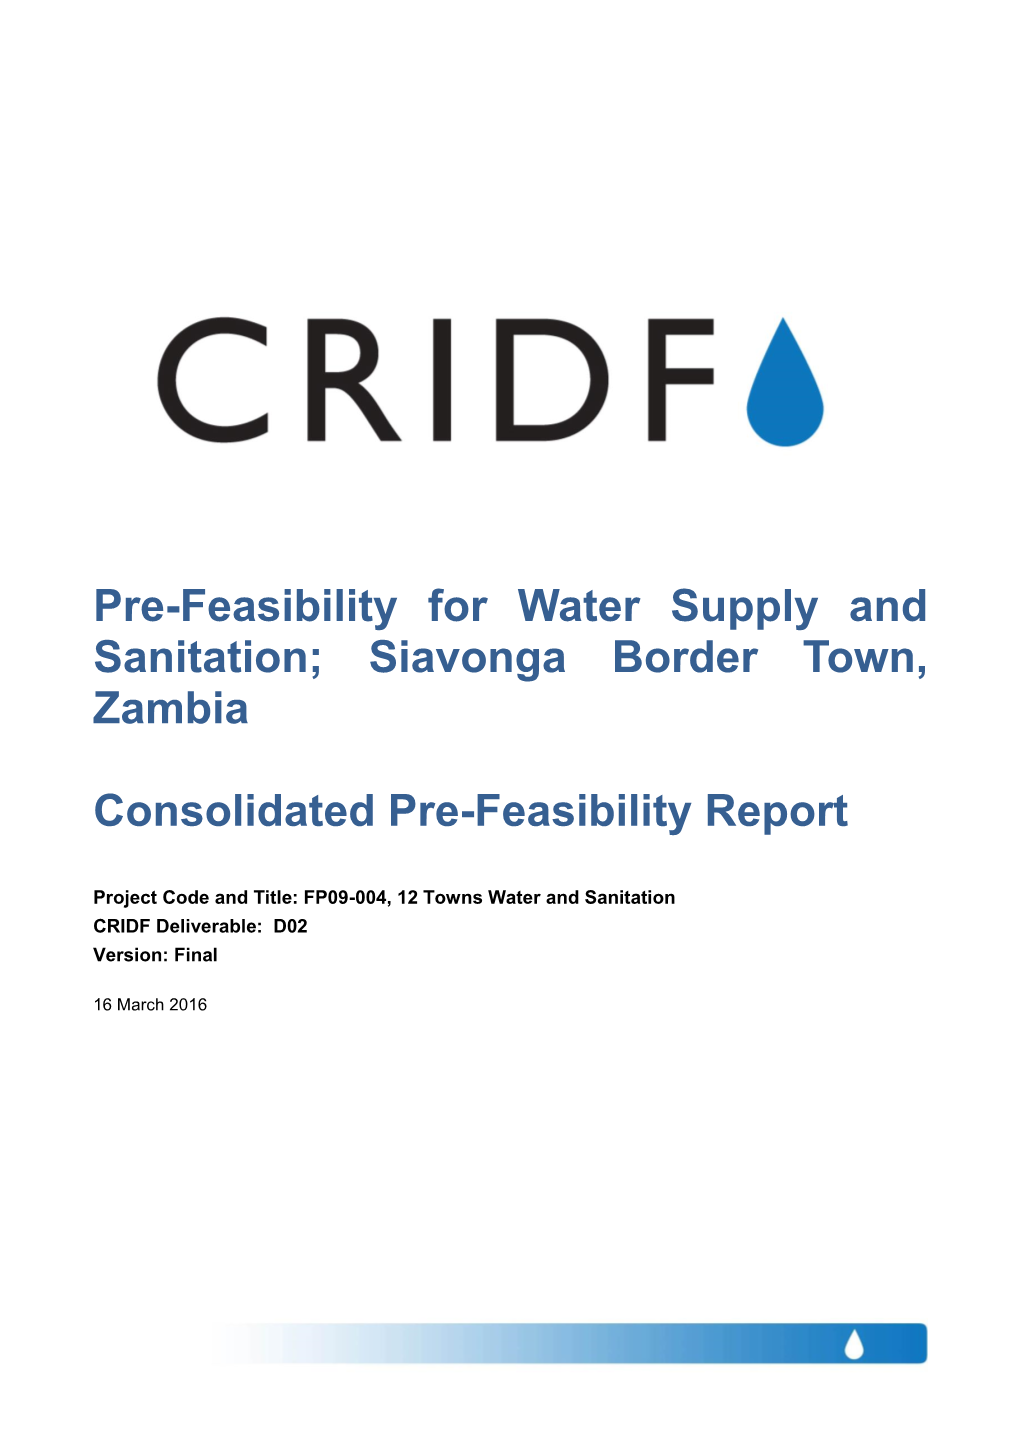 Pre-Feasibility for Water Supply and Sanitation; Siavonga Border Town, Zambia